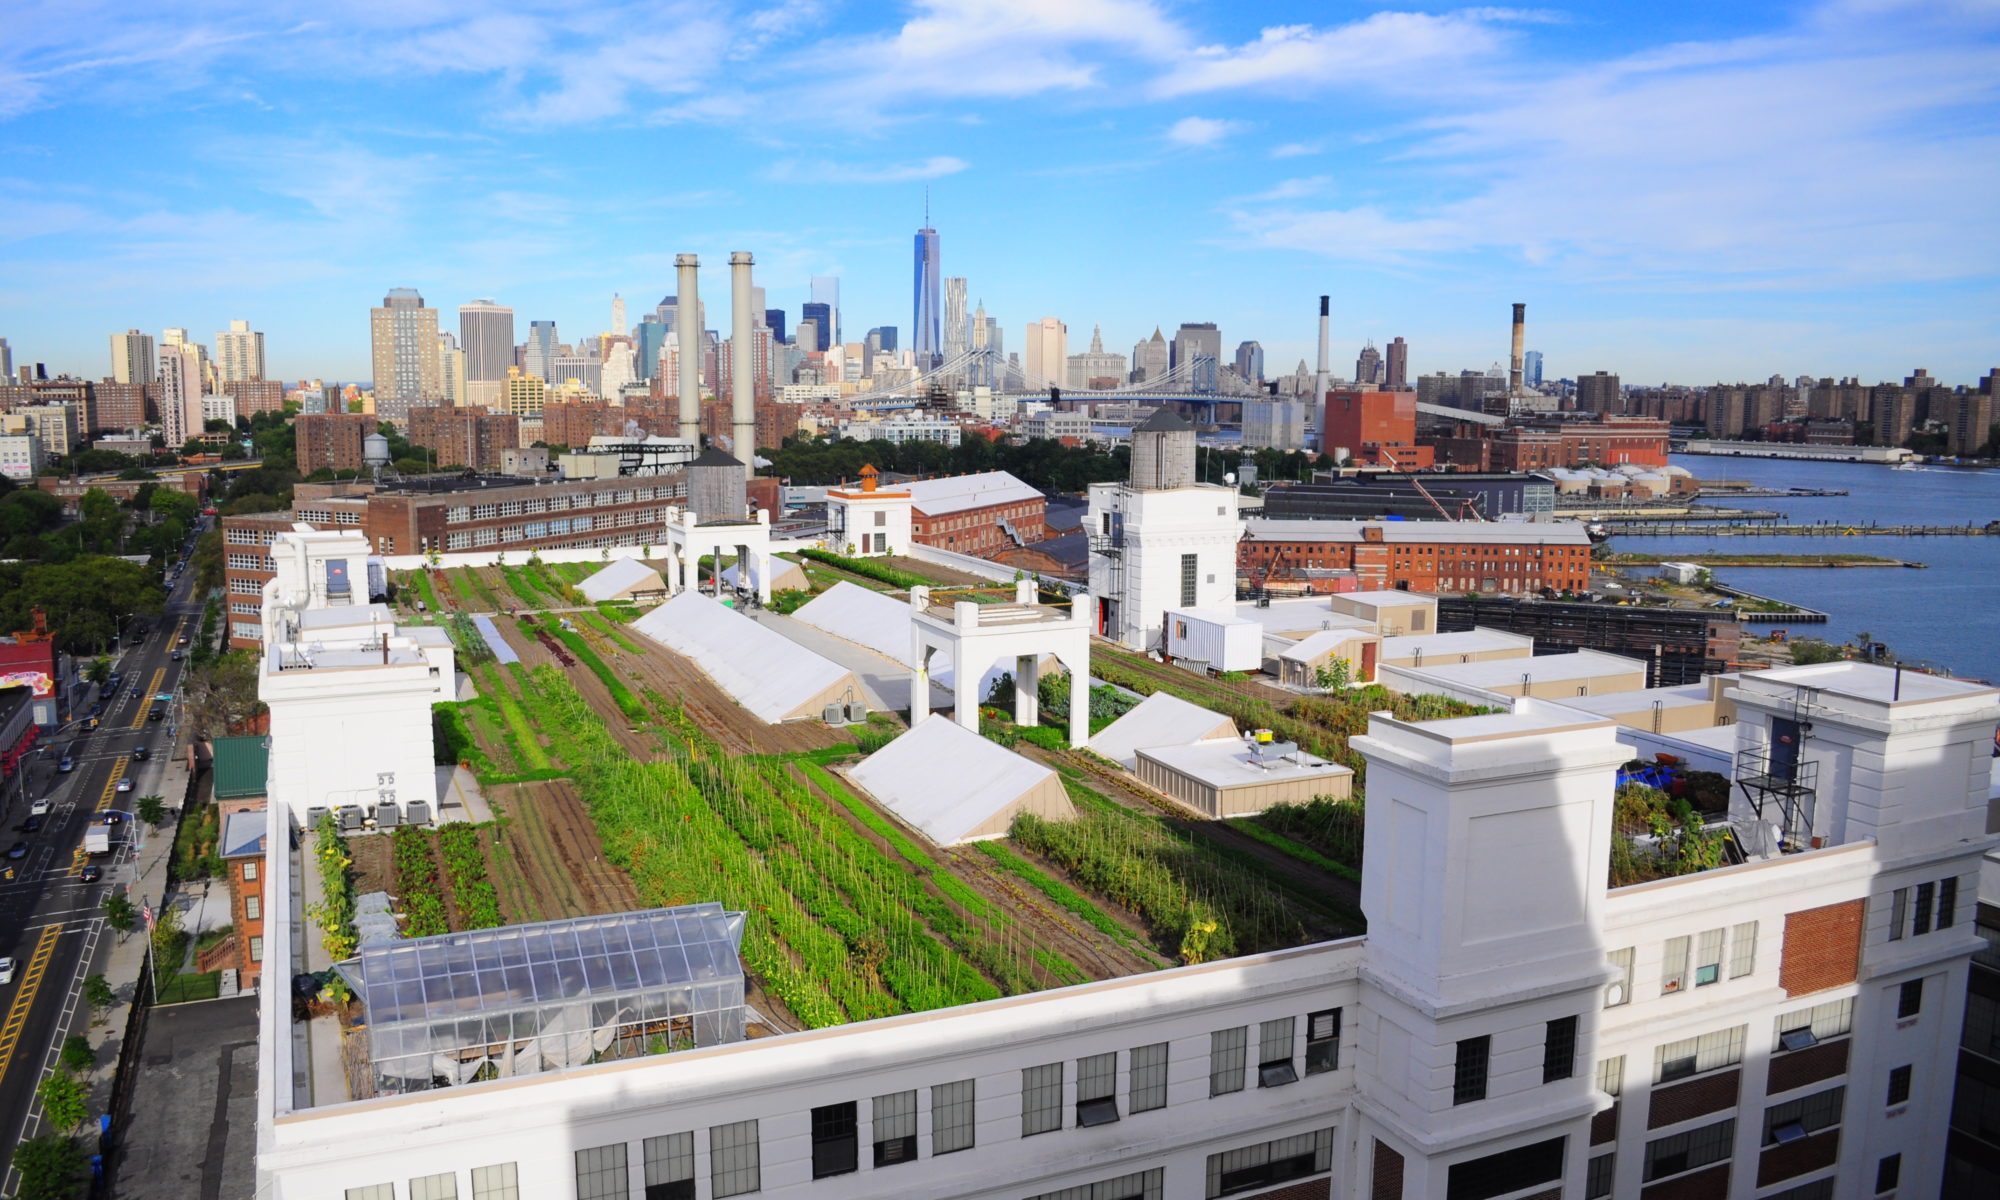 Aerial view of a rooftop farm with Manhattan skyline in the distance